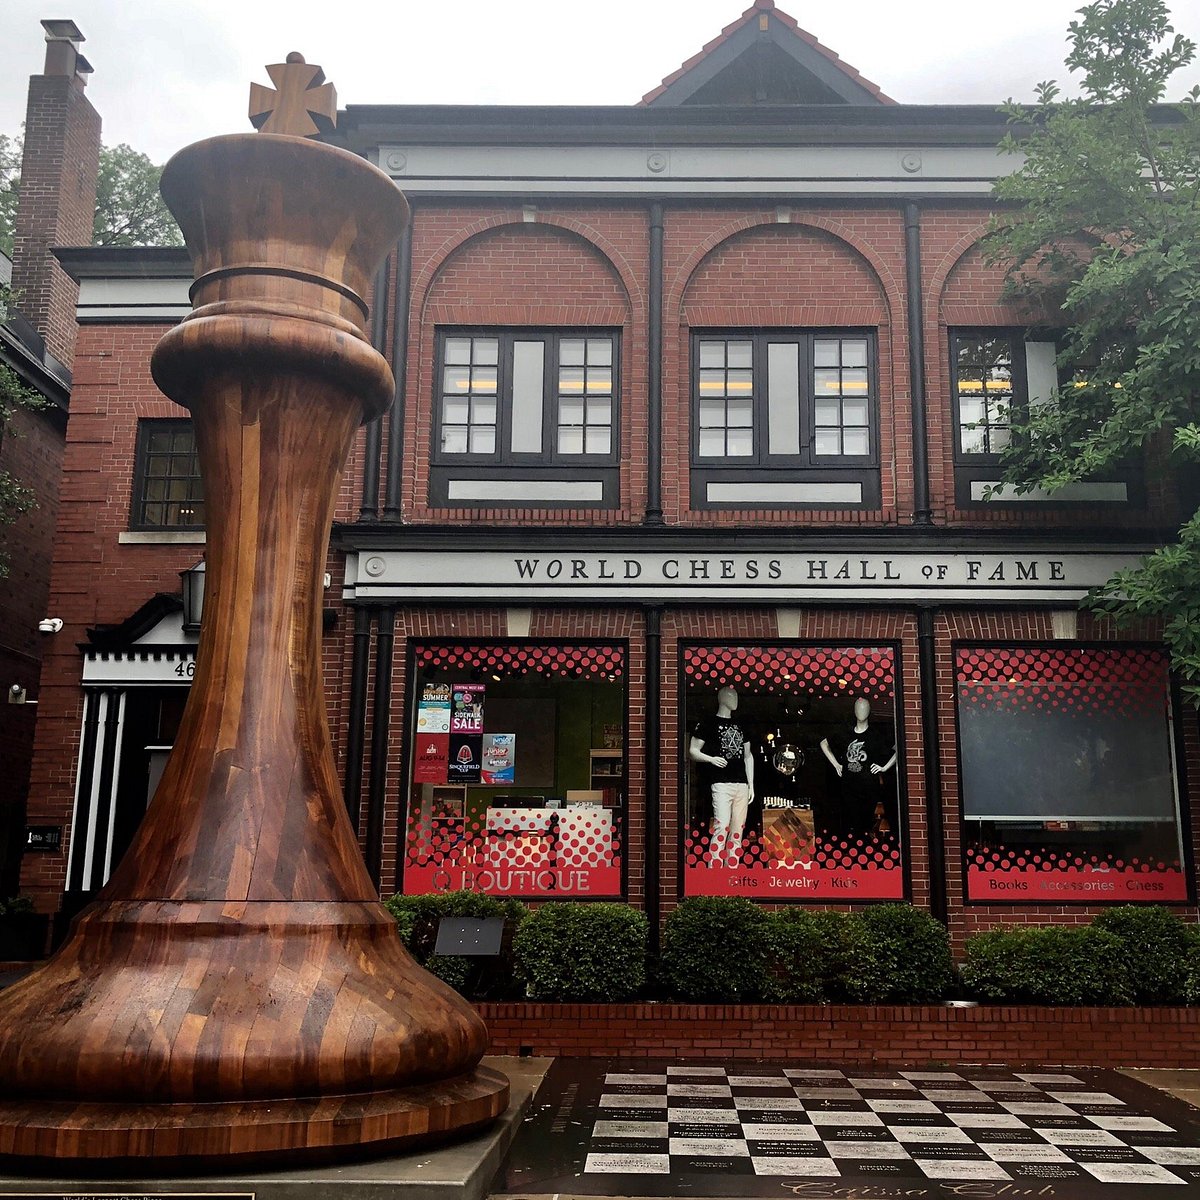 Sculptures and a giant chess set decorate a plaza as part of Louis